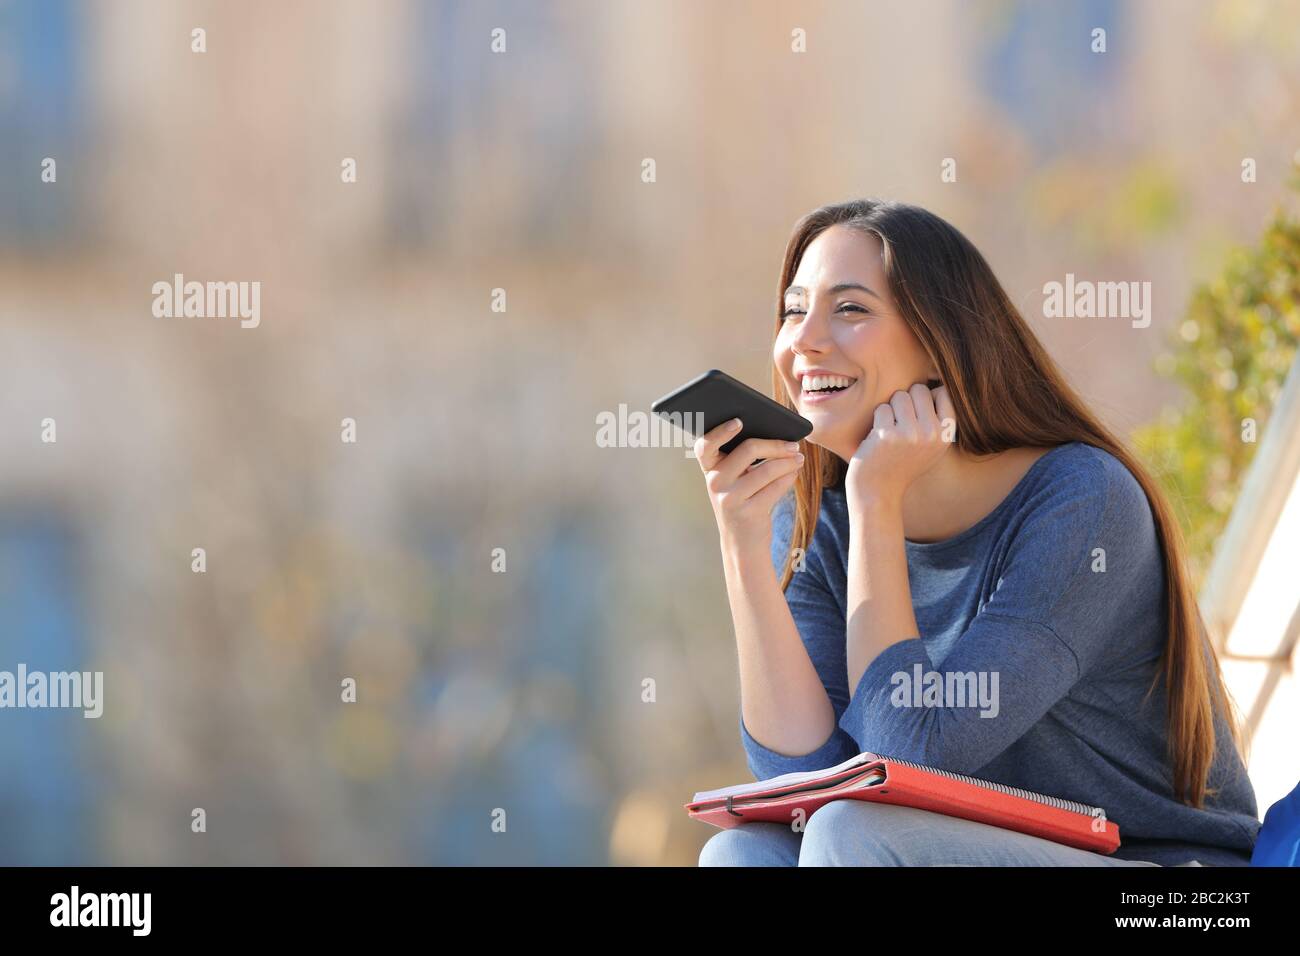 Happy student using voice recognition on mobile phone sitting outdoors in a university campus Stock Photo